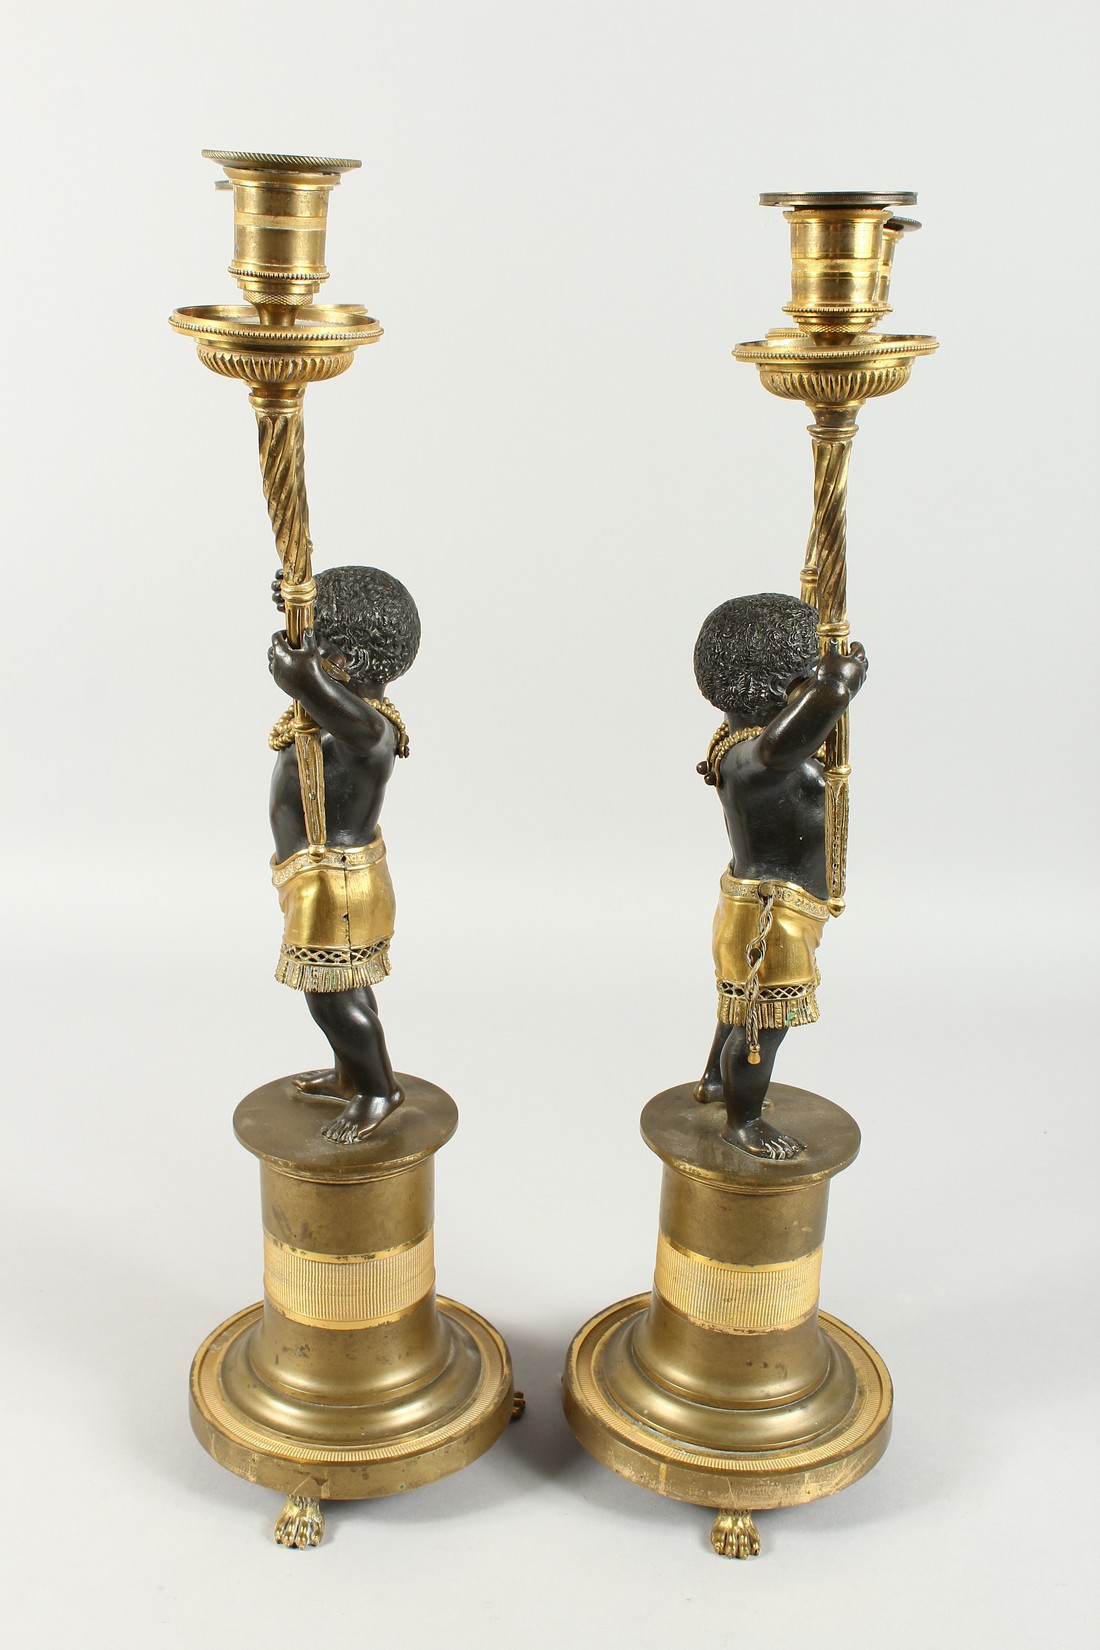 A SUPERB PAIR OF EMPIRE BRONZE AND GILT BRONZE TWO BRANCH CANDLESTICKS of nubian children holding - Image 9 of 9